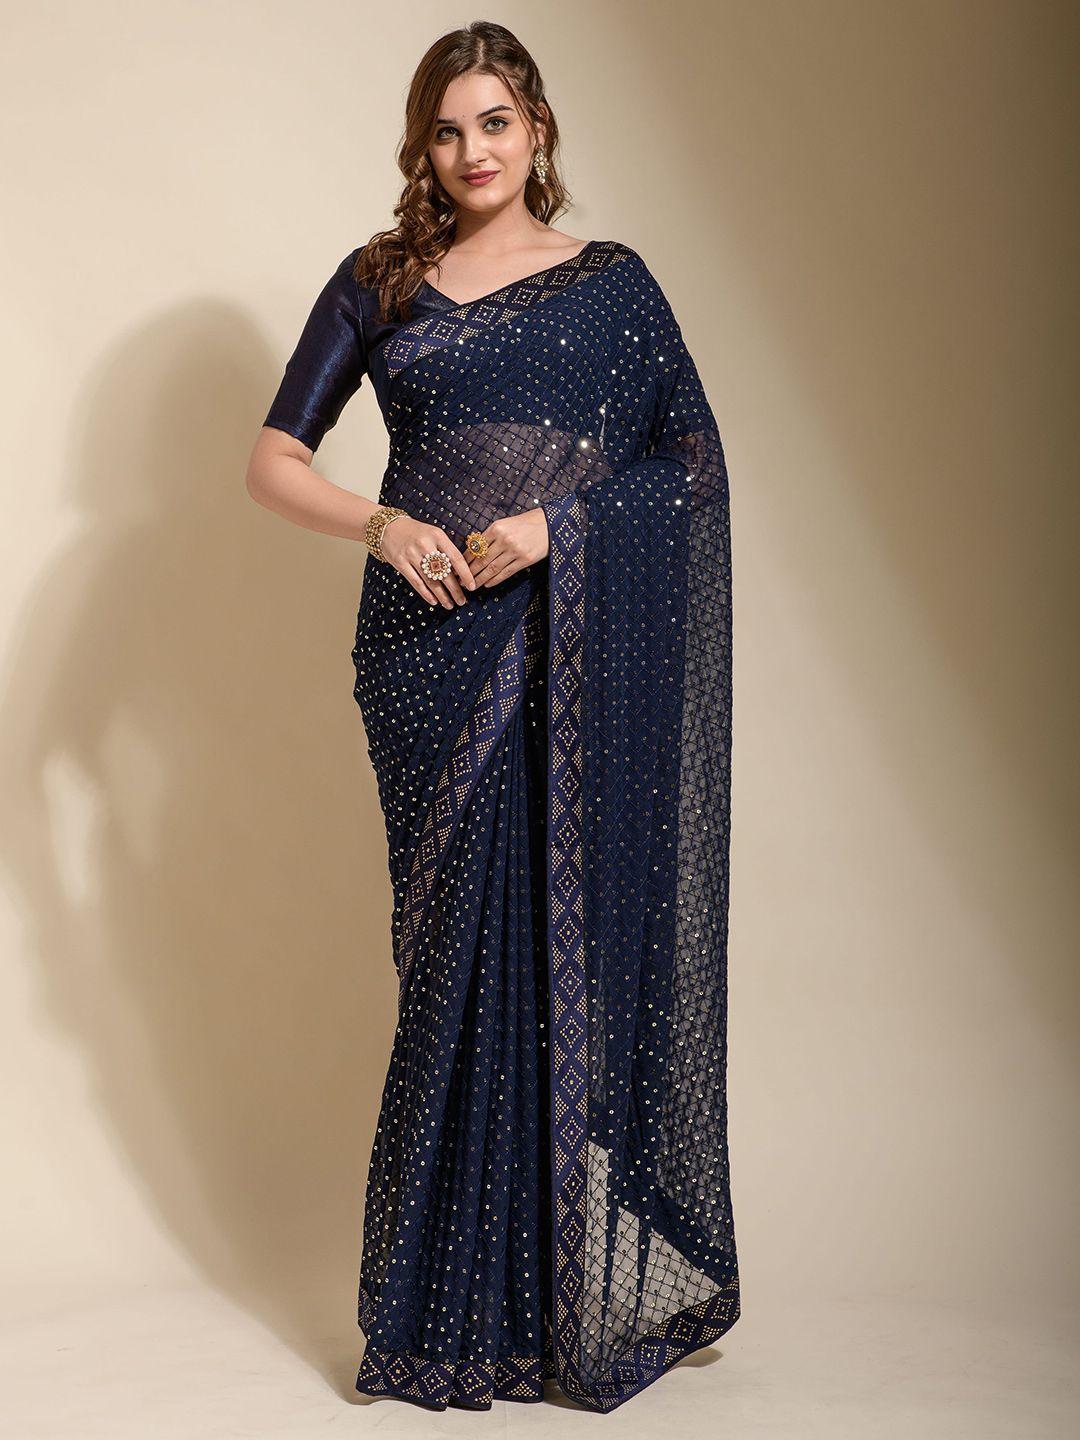 globon impex navy blue & gold-toned embellished sequinned pure georgette saree